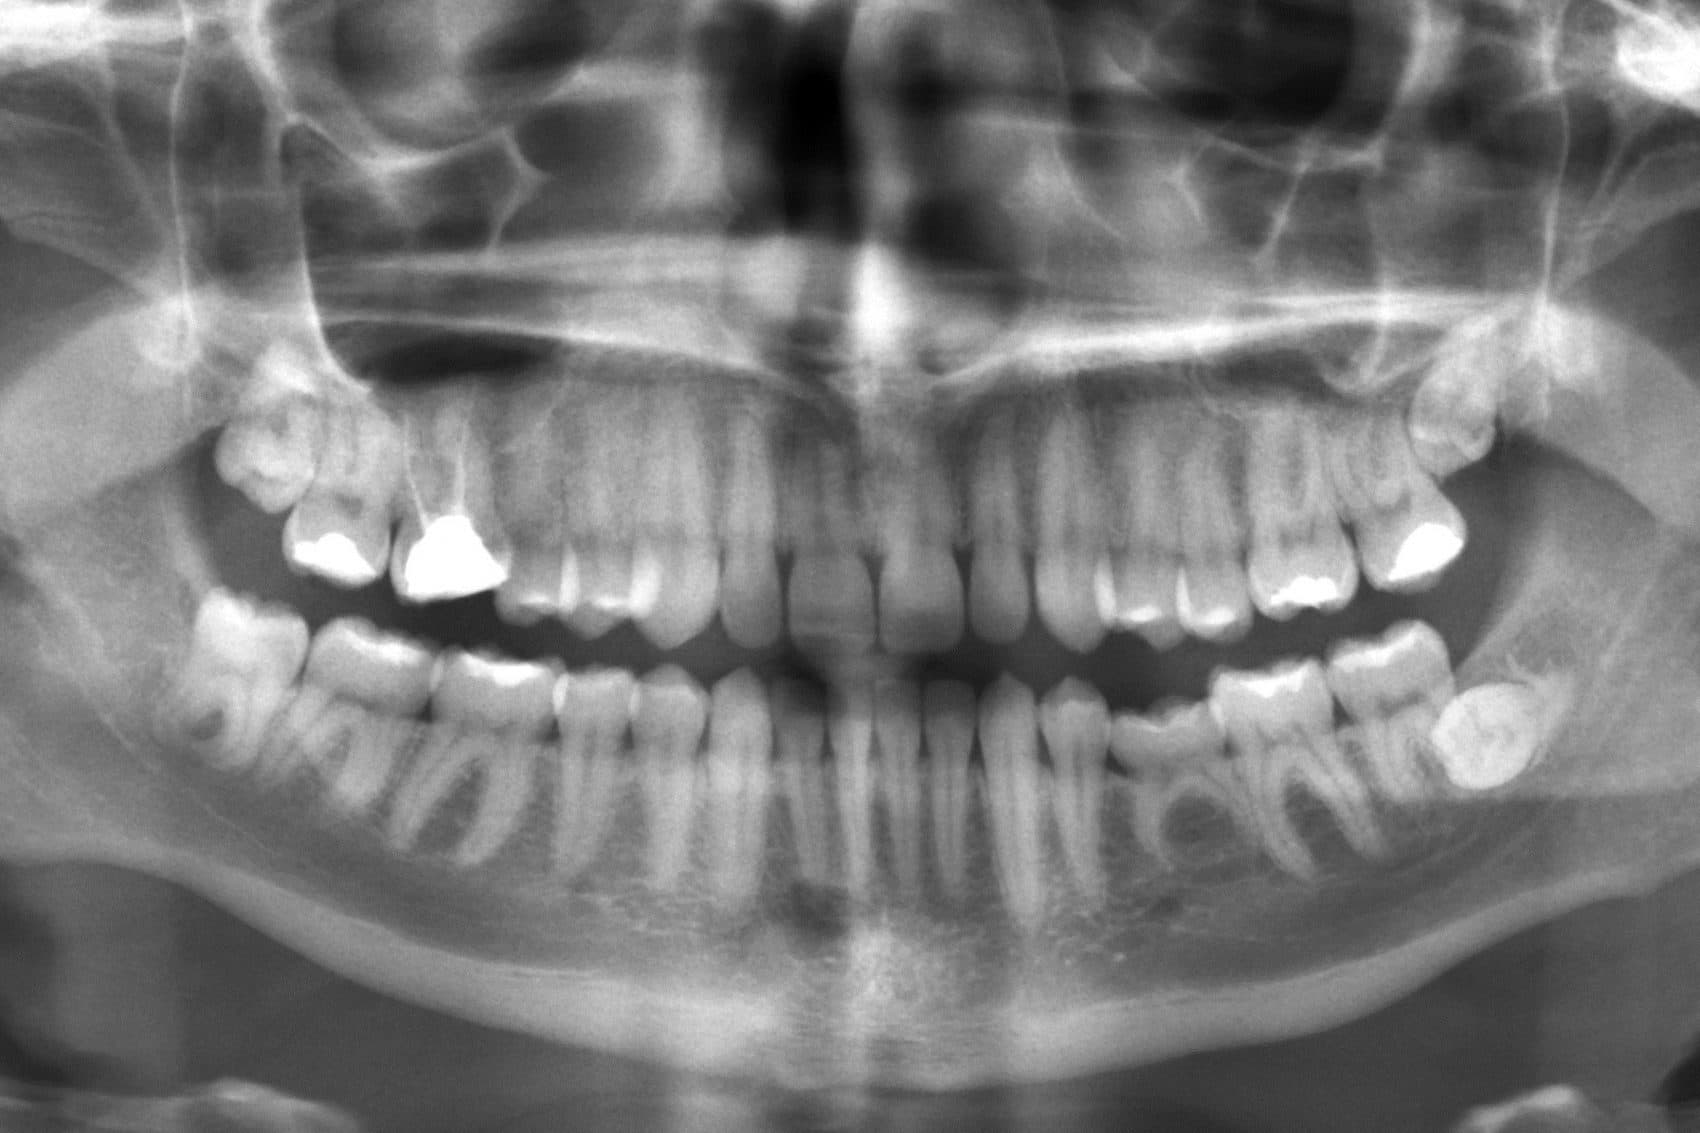 What do your teeth say about us? (Public Domain)